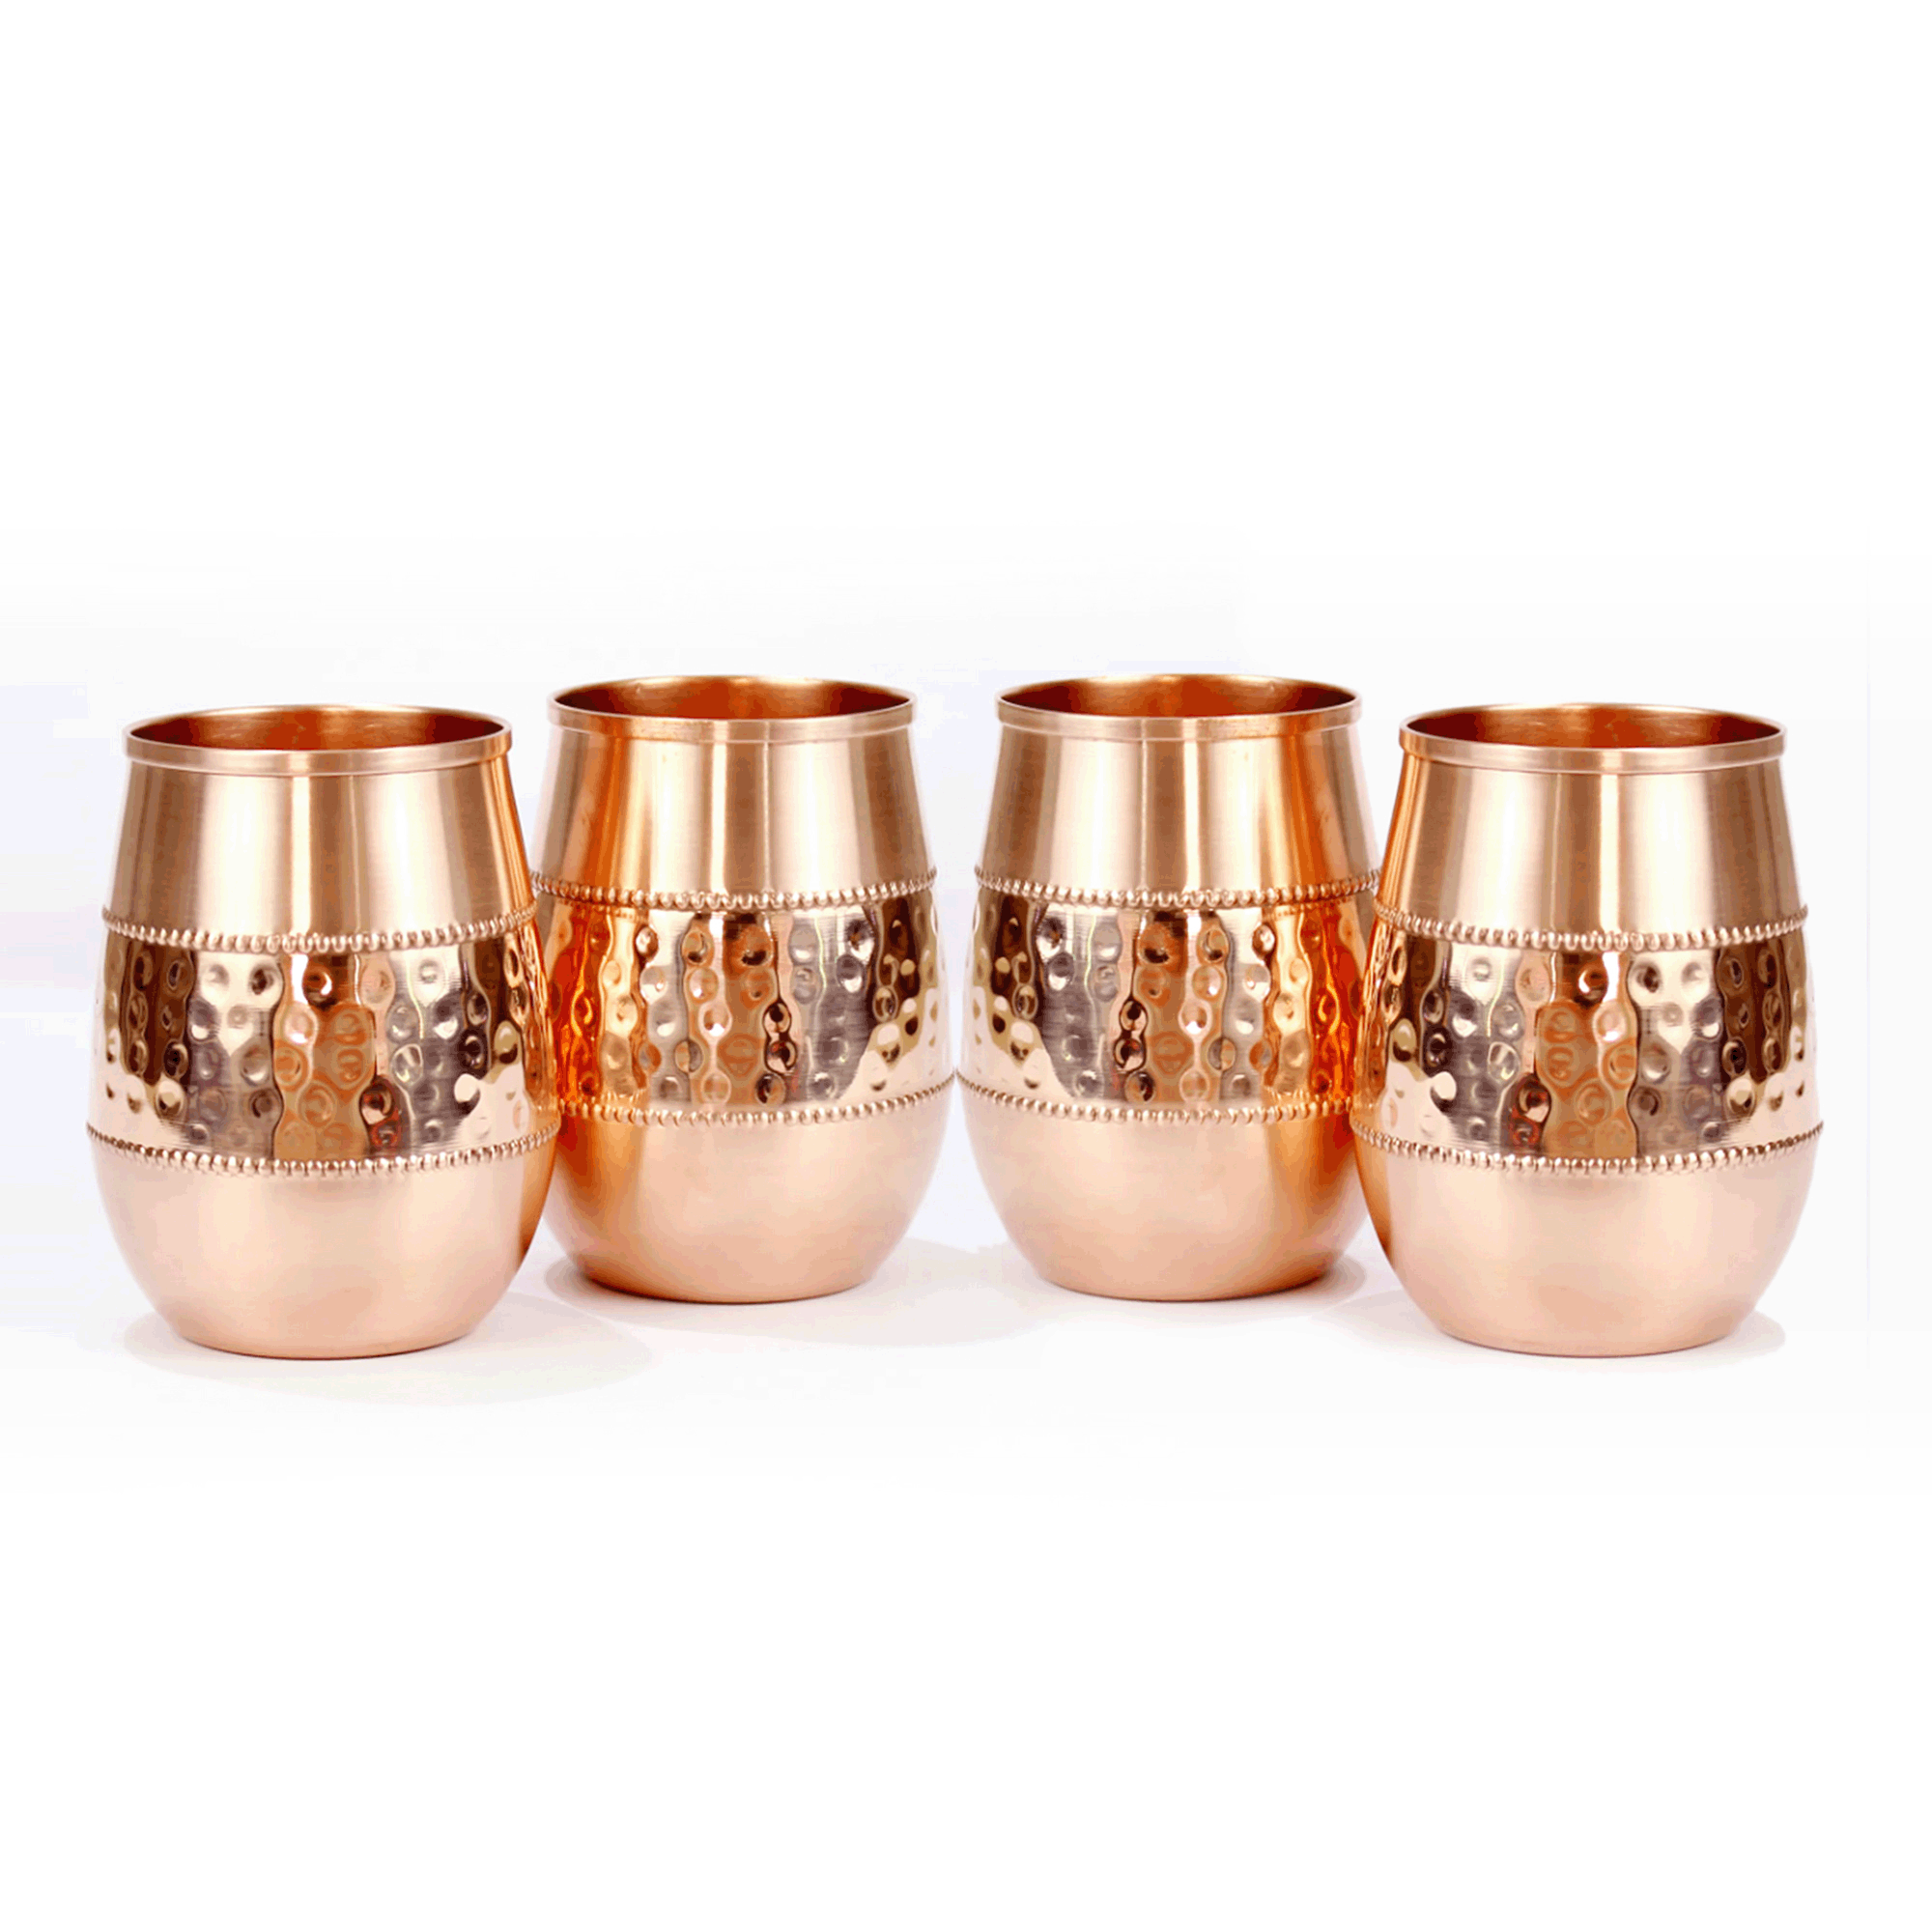 Pure copper water drinking glass set of 4 pieces